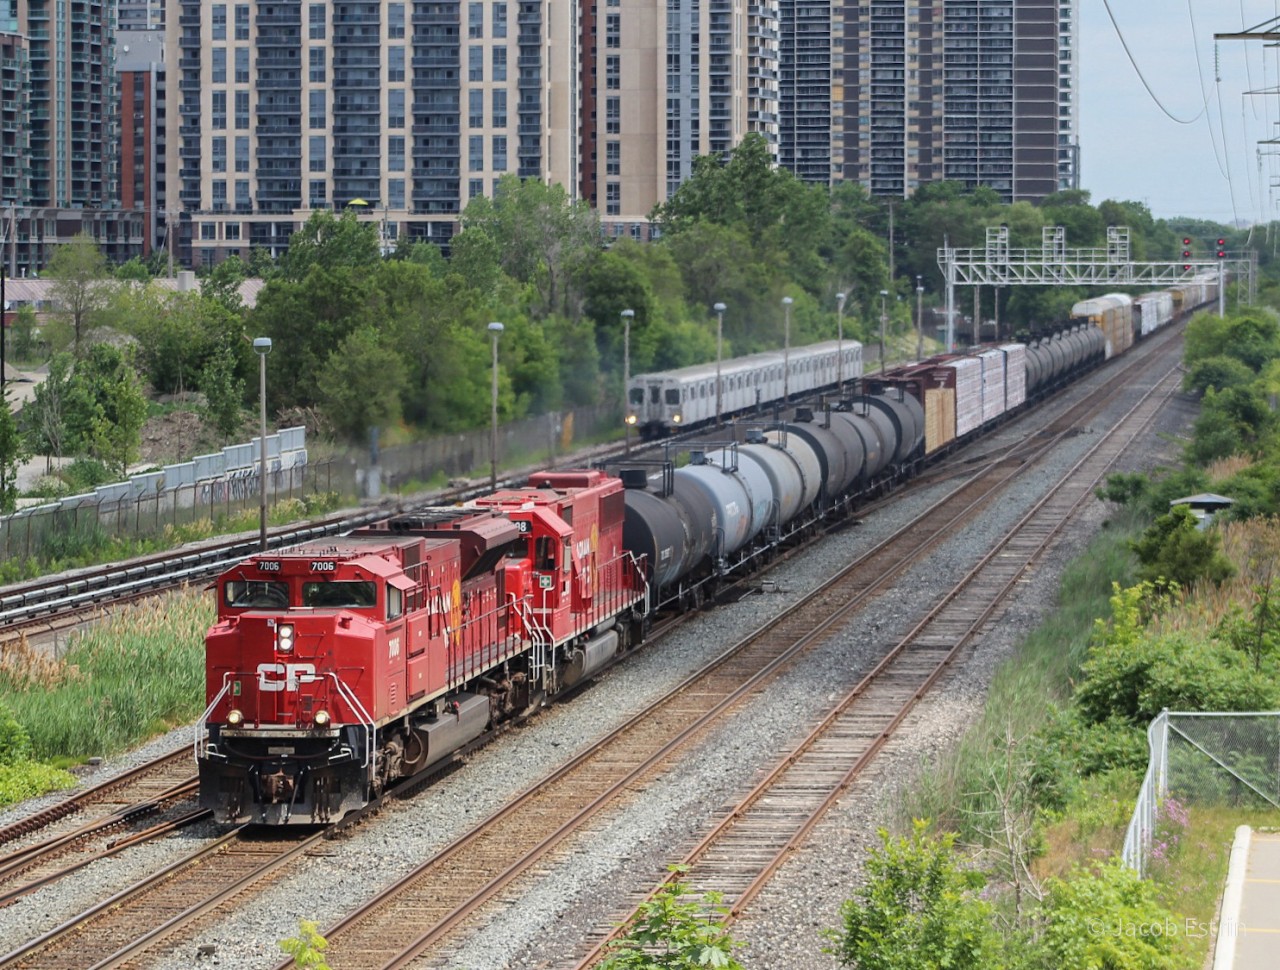 Here we have CP 7006 leading 246 down the Galt. Leading of course is a beautiful red ACU and trailing second is a SD60 numbered 6308. Both were facing forward which is a little unusual for this train.